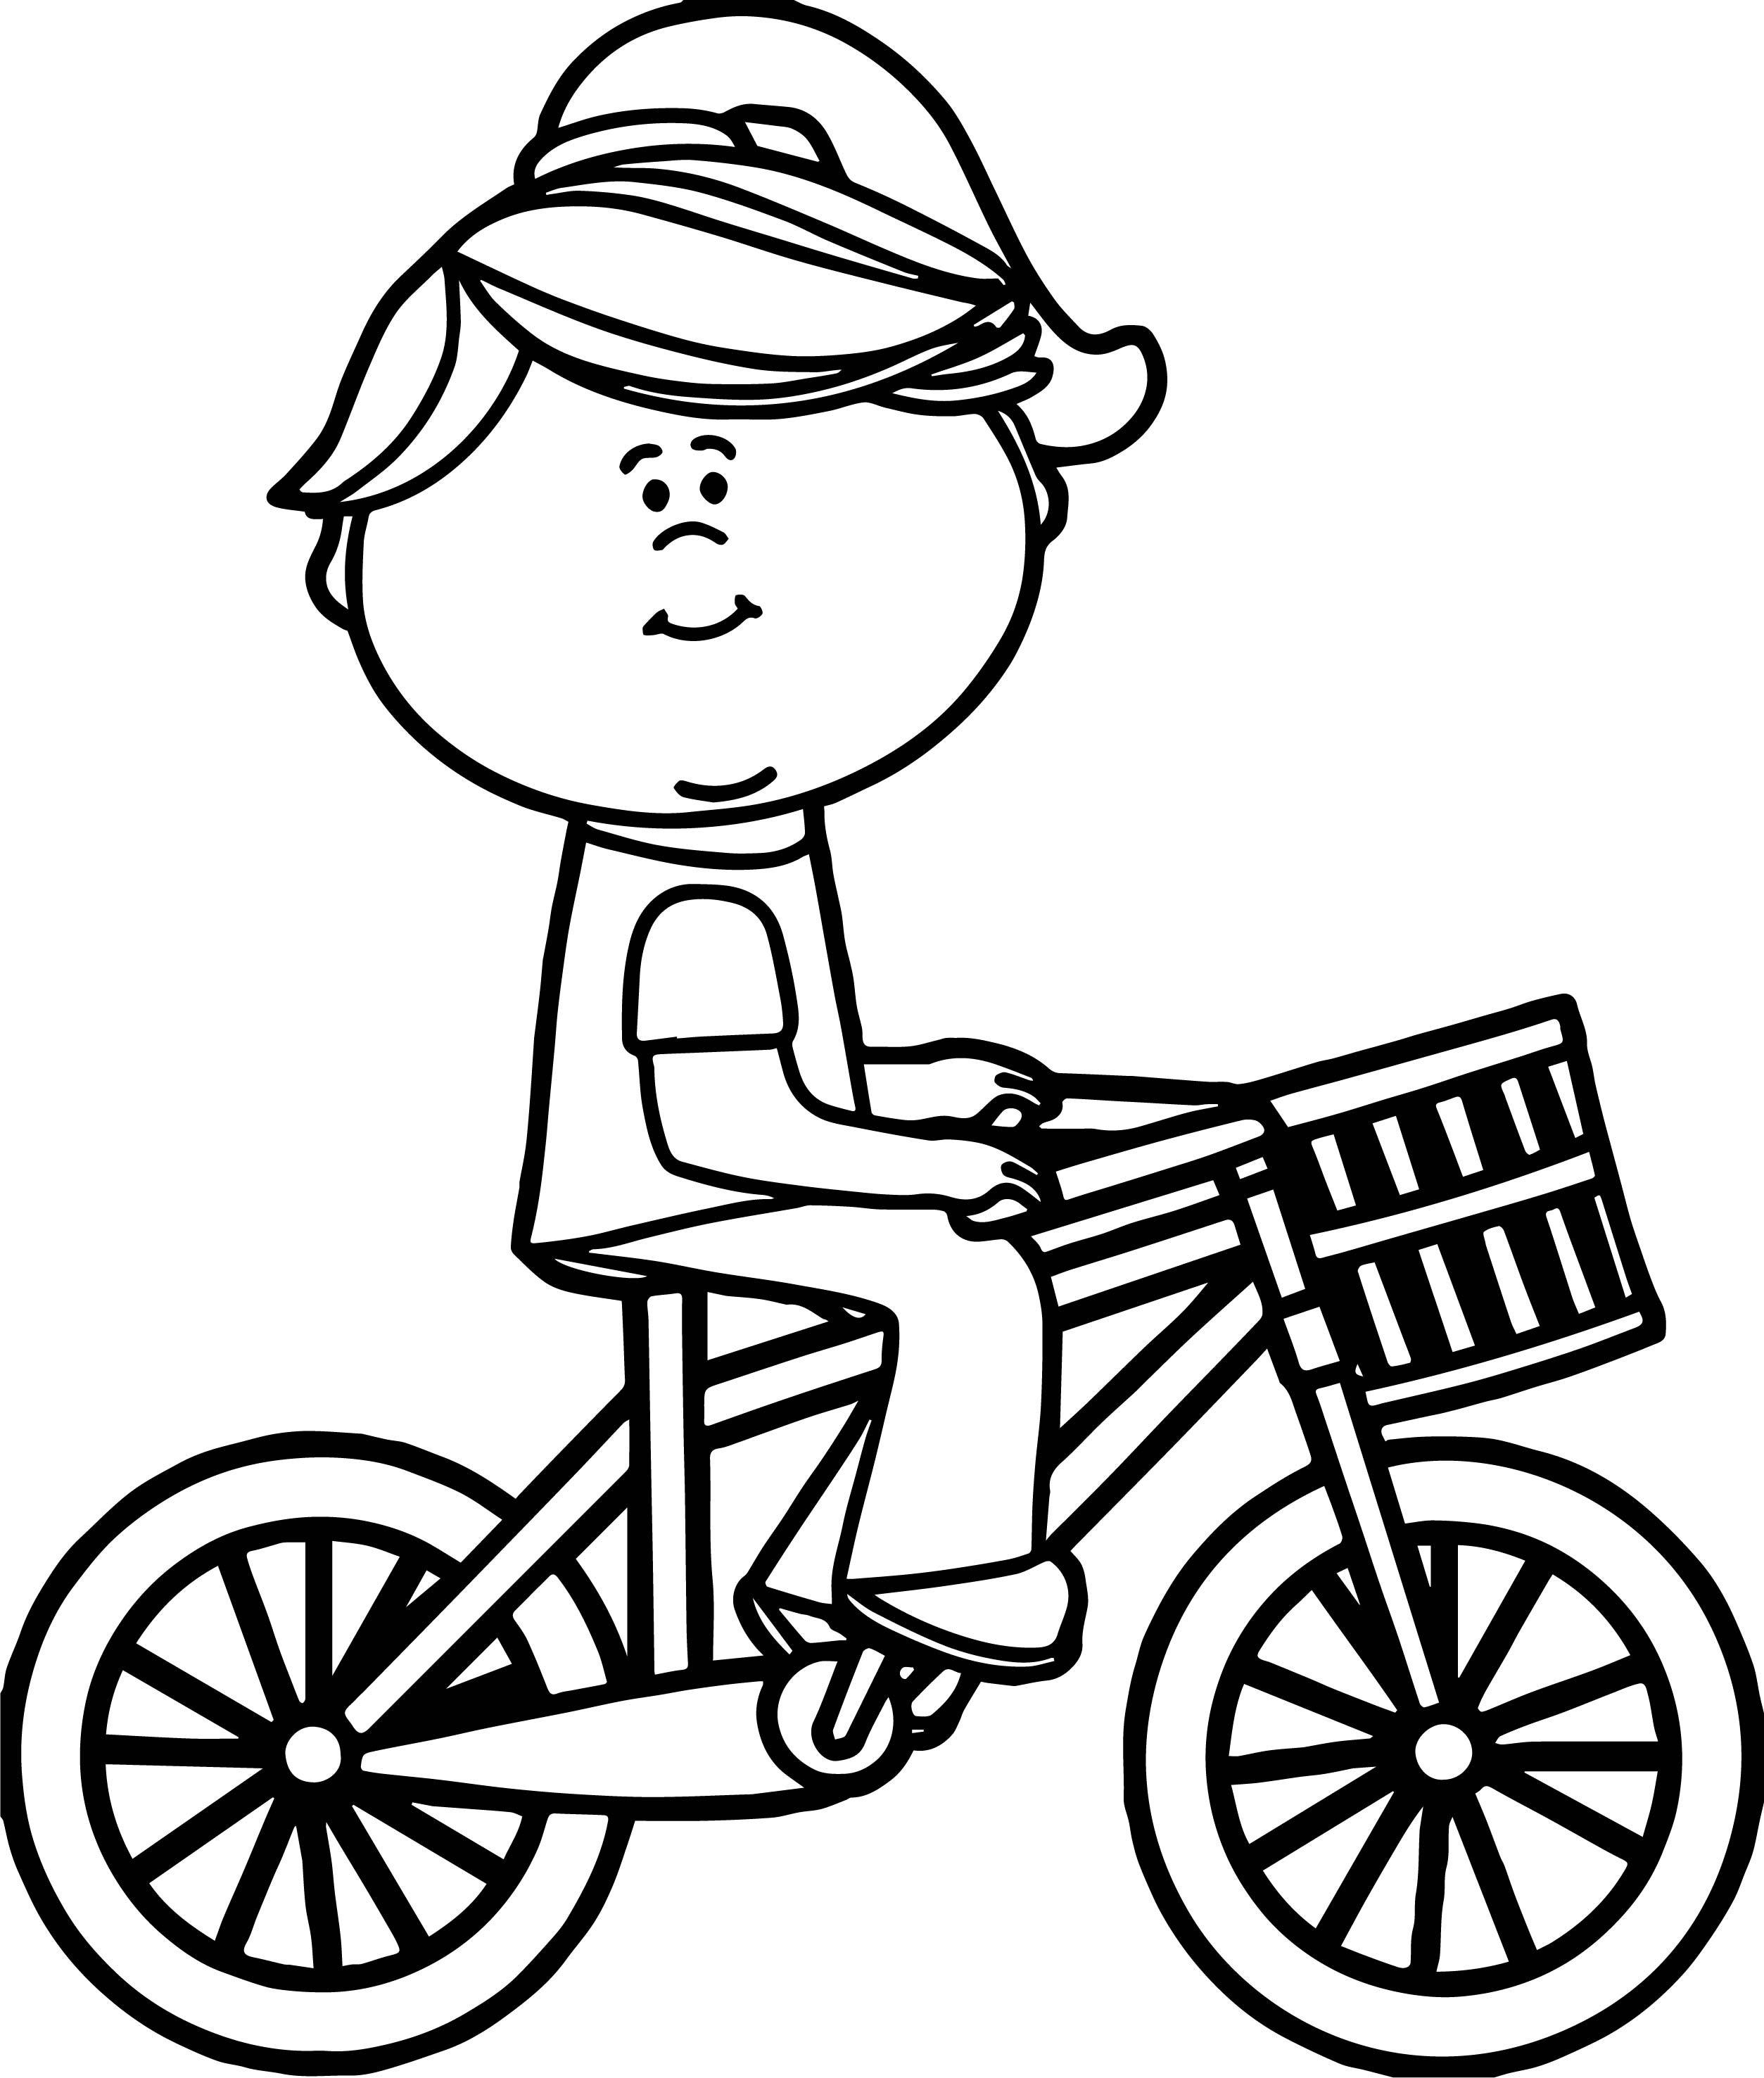 bike-riding-coloring-pages-at-getcolorings-free-printable-colorings-pages-to-print-and-color